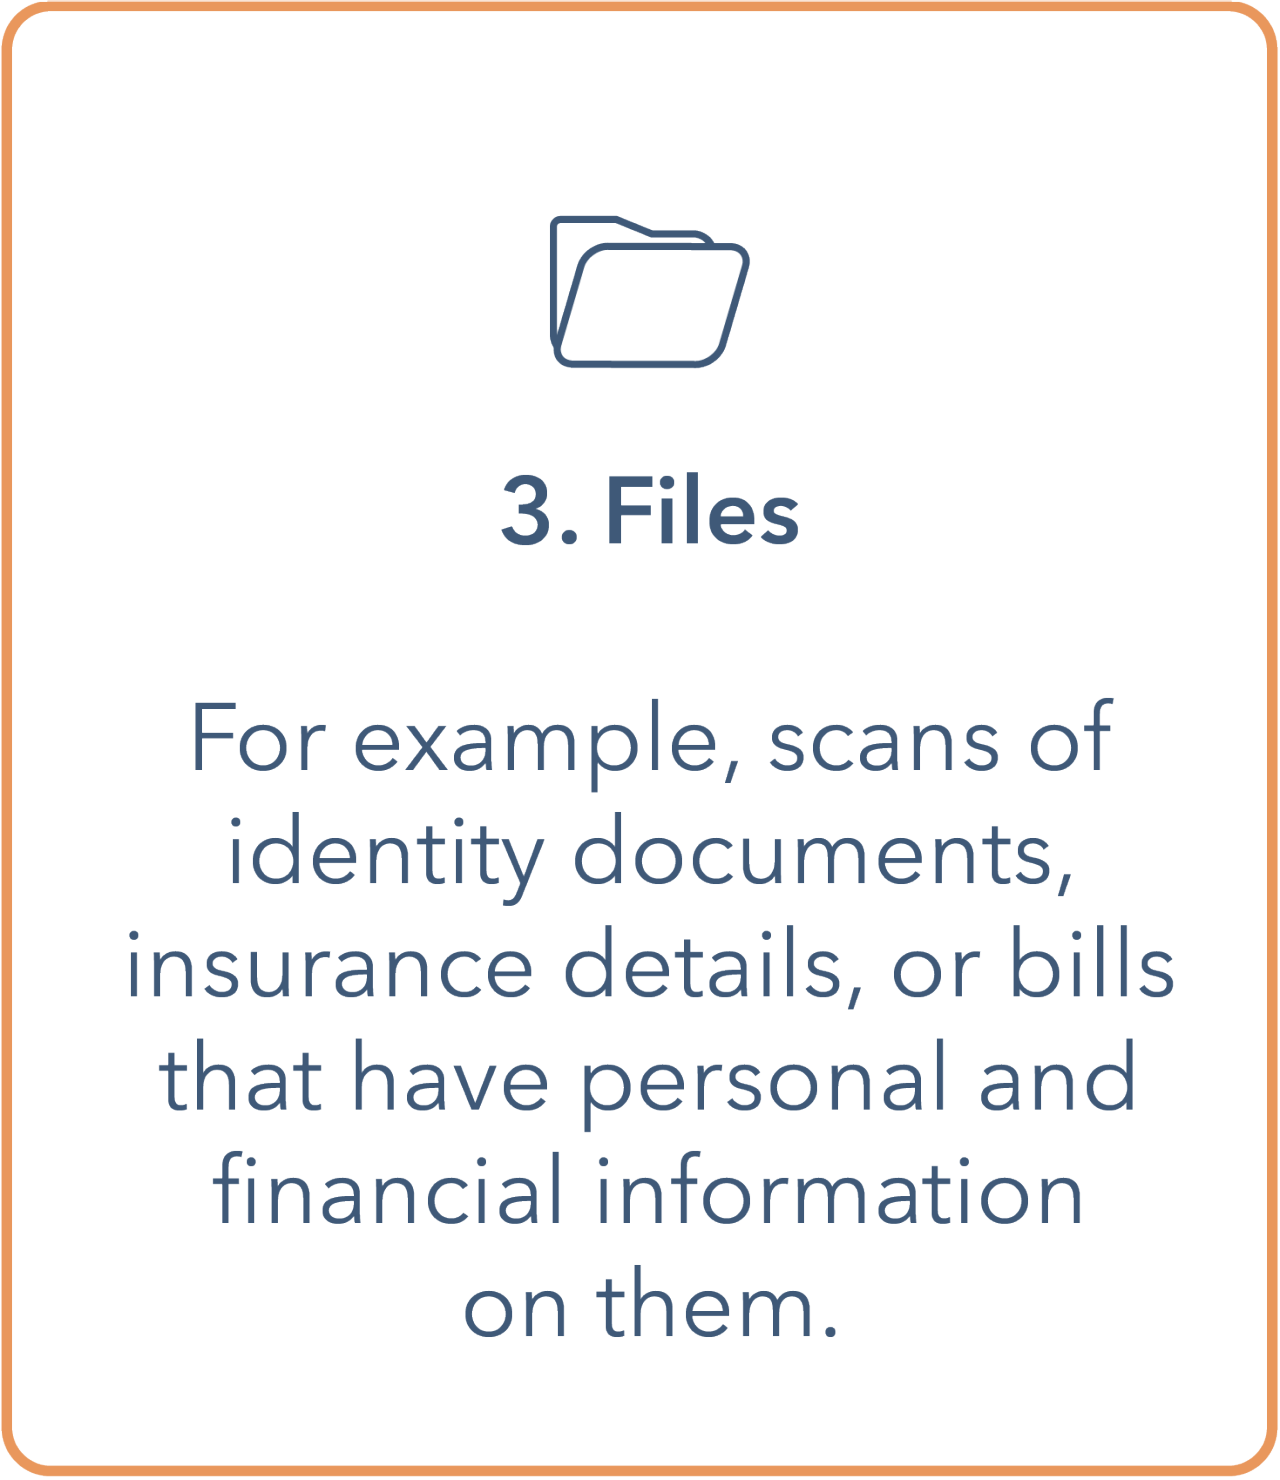 Image shows a tile with an outline of a file at the top. Underneath is a bullet point containing '3. Files'. The main body contains 'for example, scans of identity documents, insurance details, or bills that have personal and financial information on them. Tile has an orange outline border and text is in dark blue.